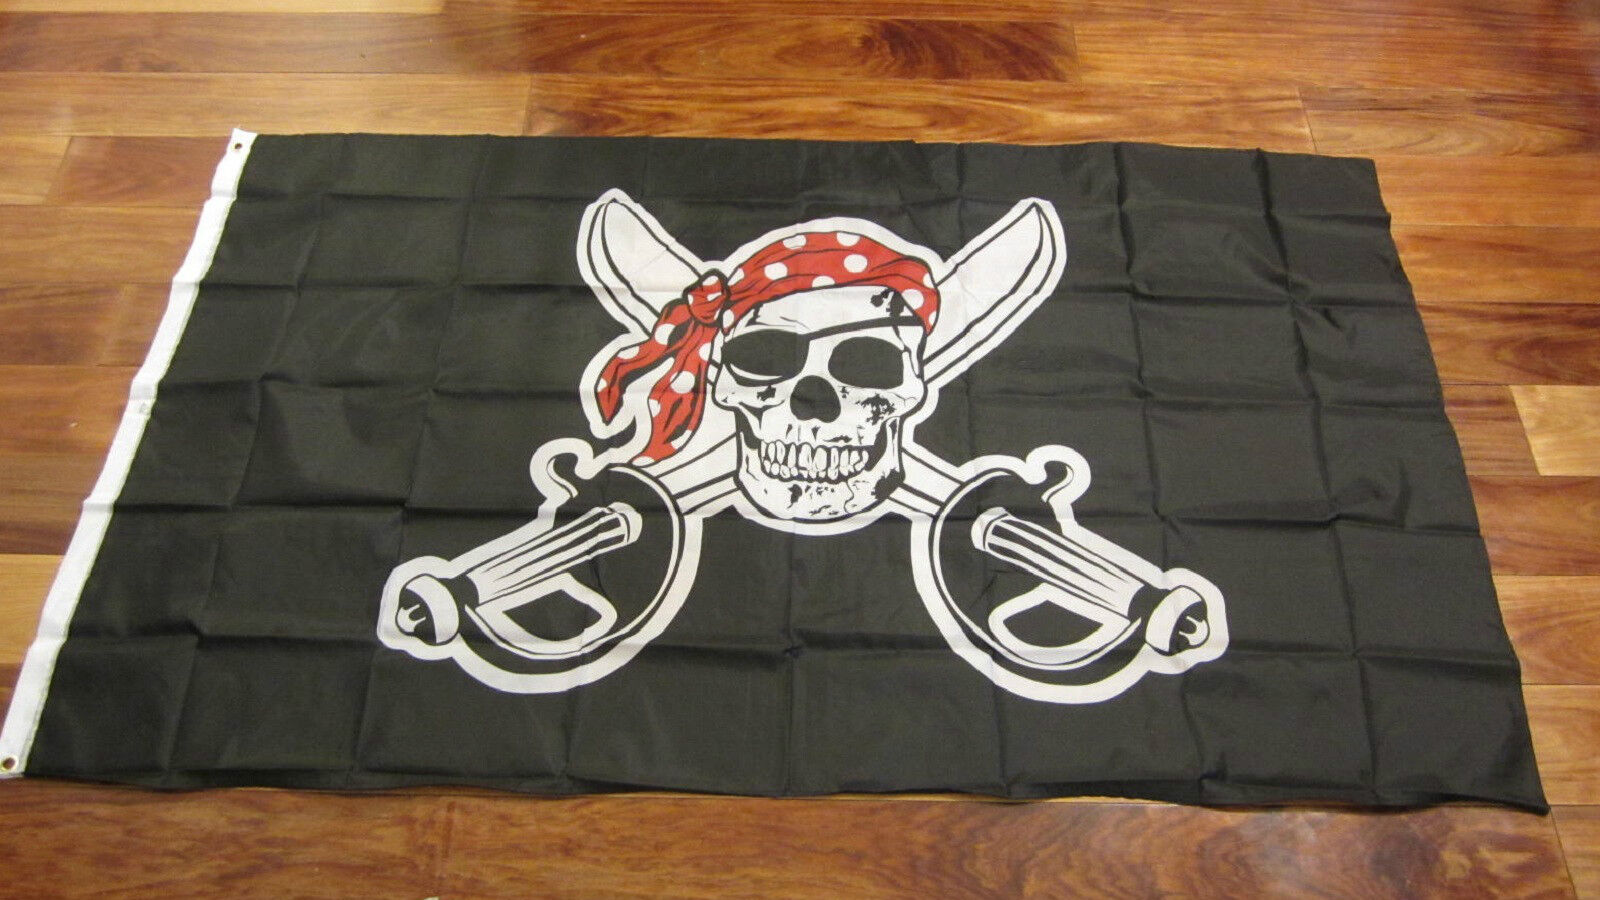 Pirate Skull and Crossbones Red Bandana Satin and Chrome Office Desk Table Flag 